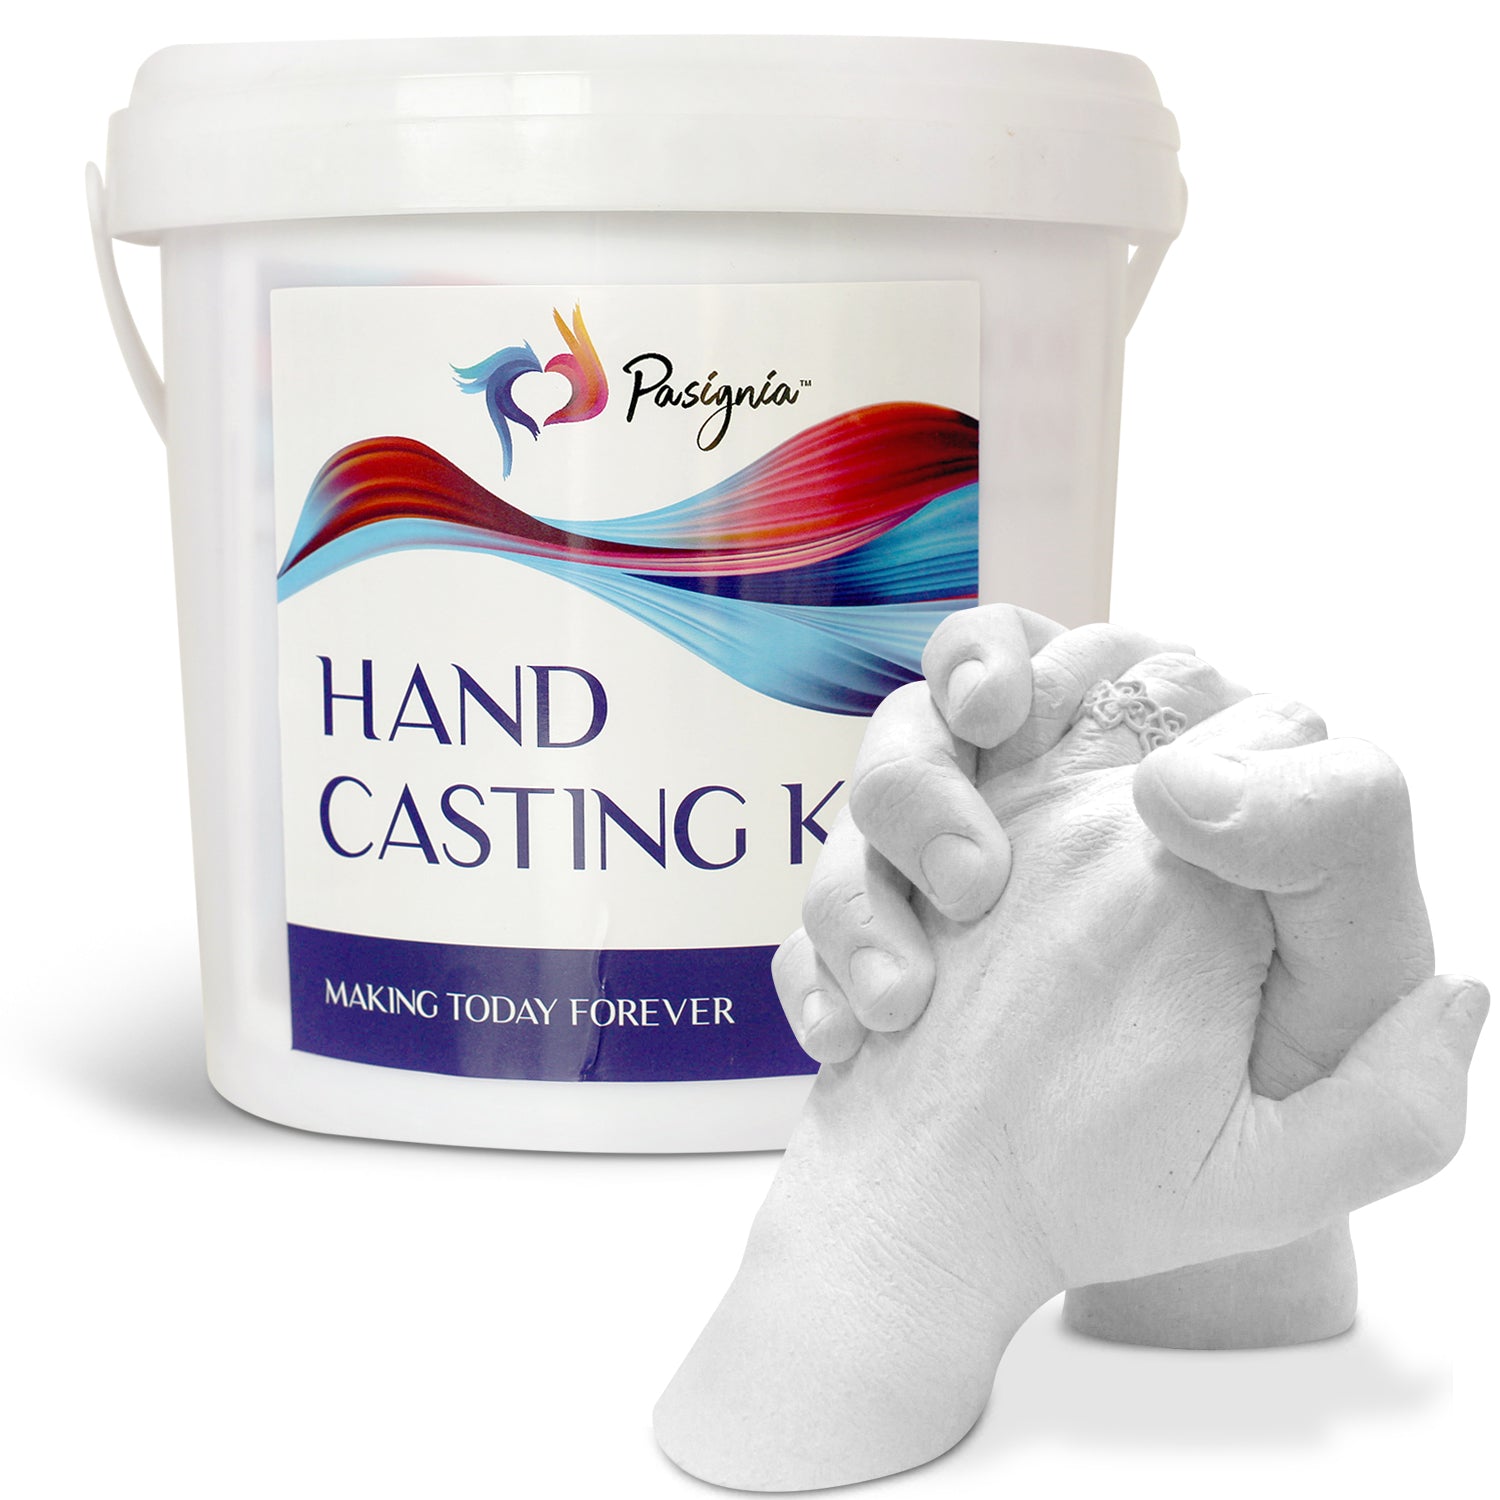 Dream Gifts - Adult 2 Hands Casting Kit